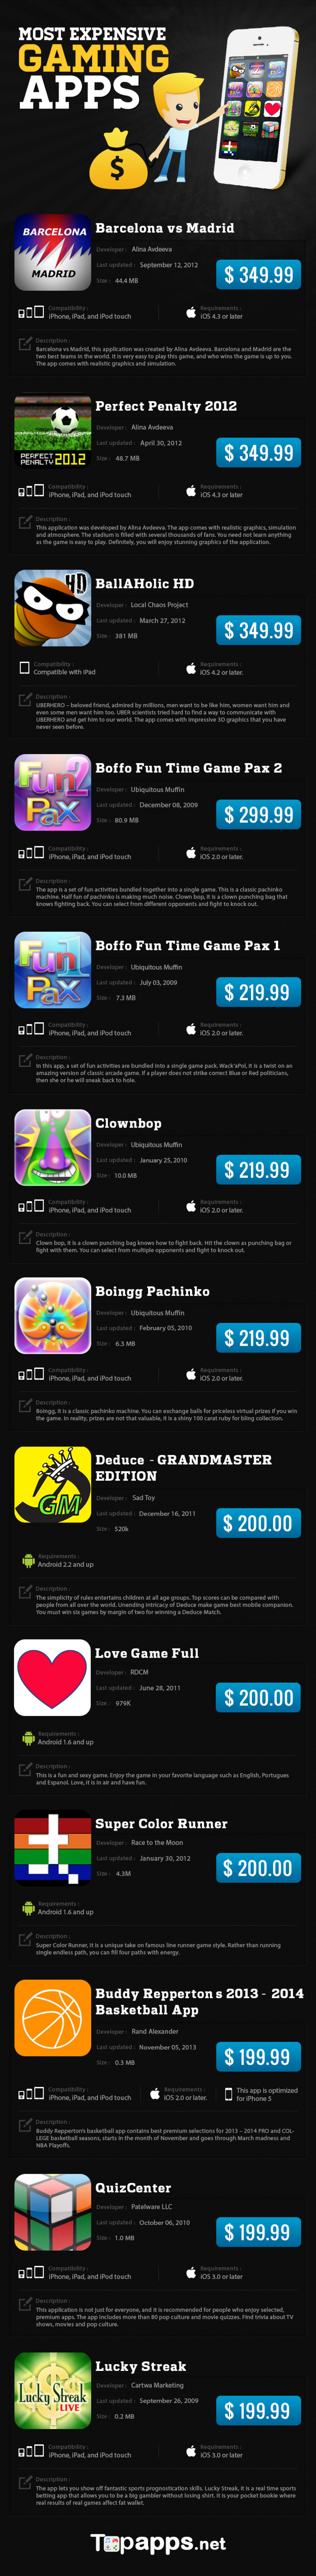 Most Expensive Gaming Apps Infographic